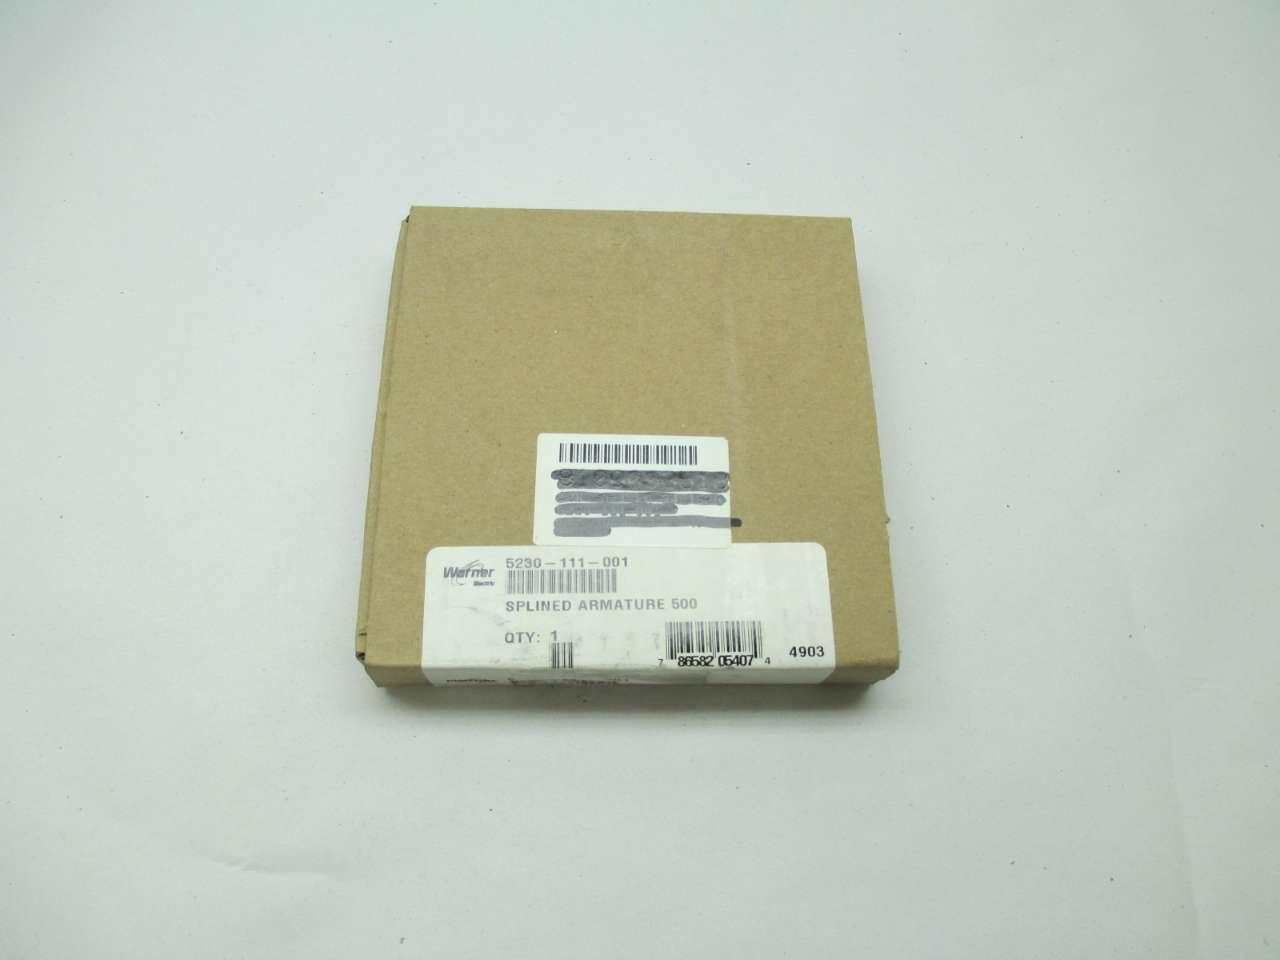 Warner 5230-111-001 Armature Plate 5230111001 for Ep-500 for sale online 